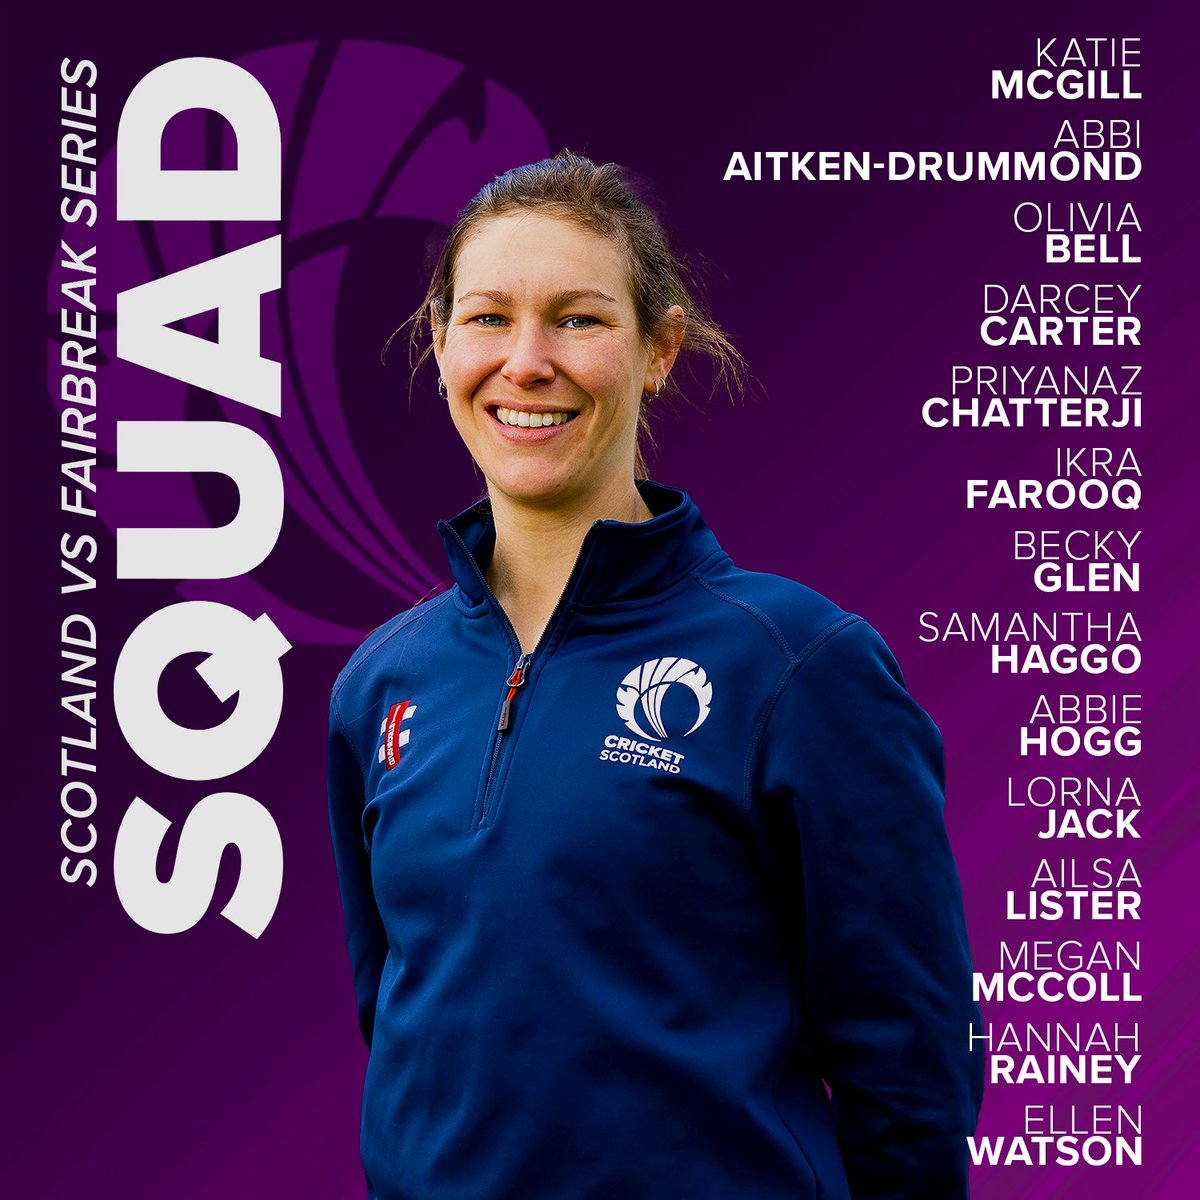 Scotland welcome @fairbreakglobal this week 🙌 3 T20s 👇 Friday 26th @ 2:30pm Sunday 28th @ 10:30am & 2:30pm 📍 @GrangeCC Edinburgh ✅ Entry is FREE Full story and squad 👇 🔗 cricketscotland.com/scotland-welco… #FollowScotland 🏴󠁧󠁢󠁳󠁣󠁴󠁿